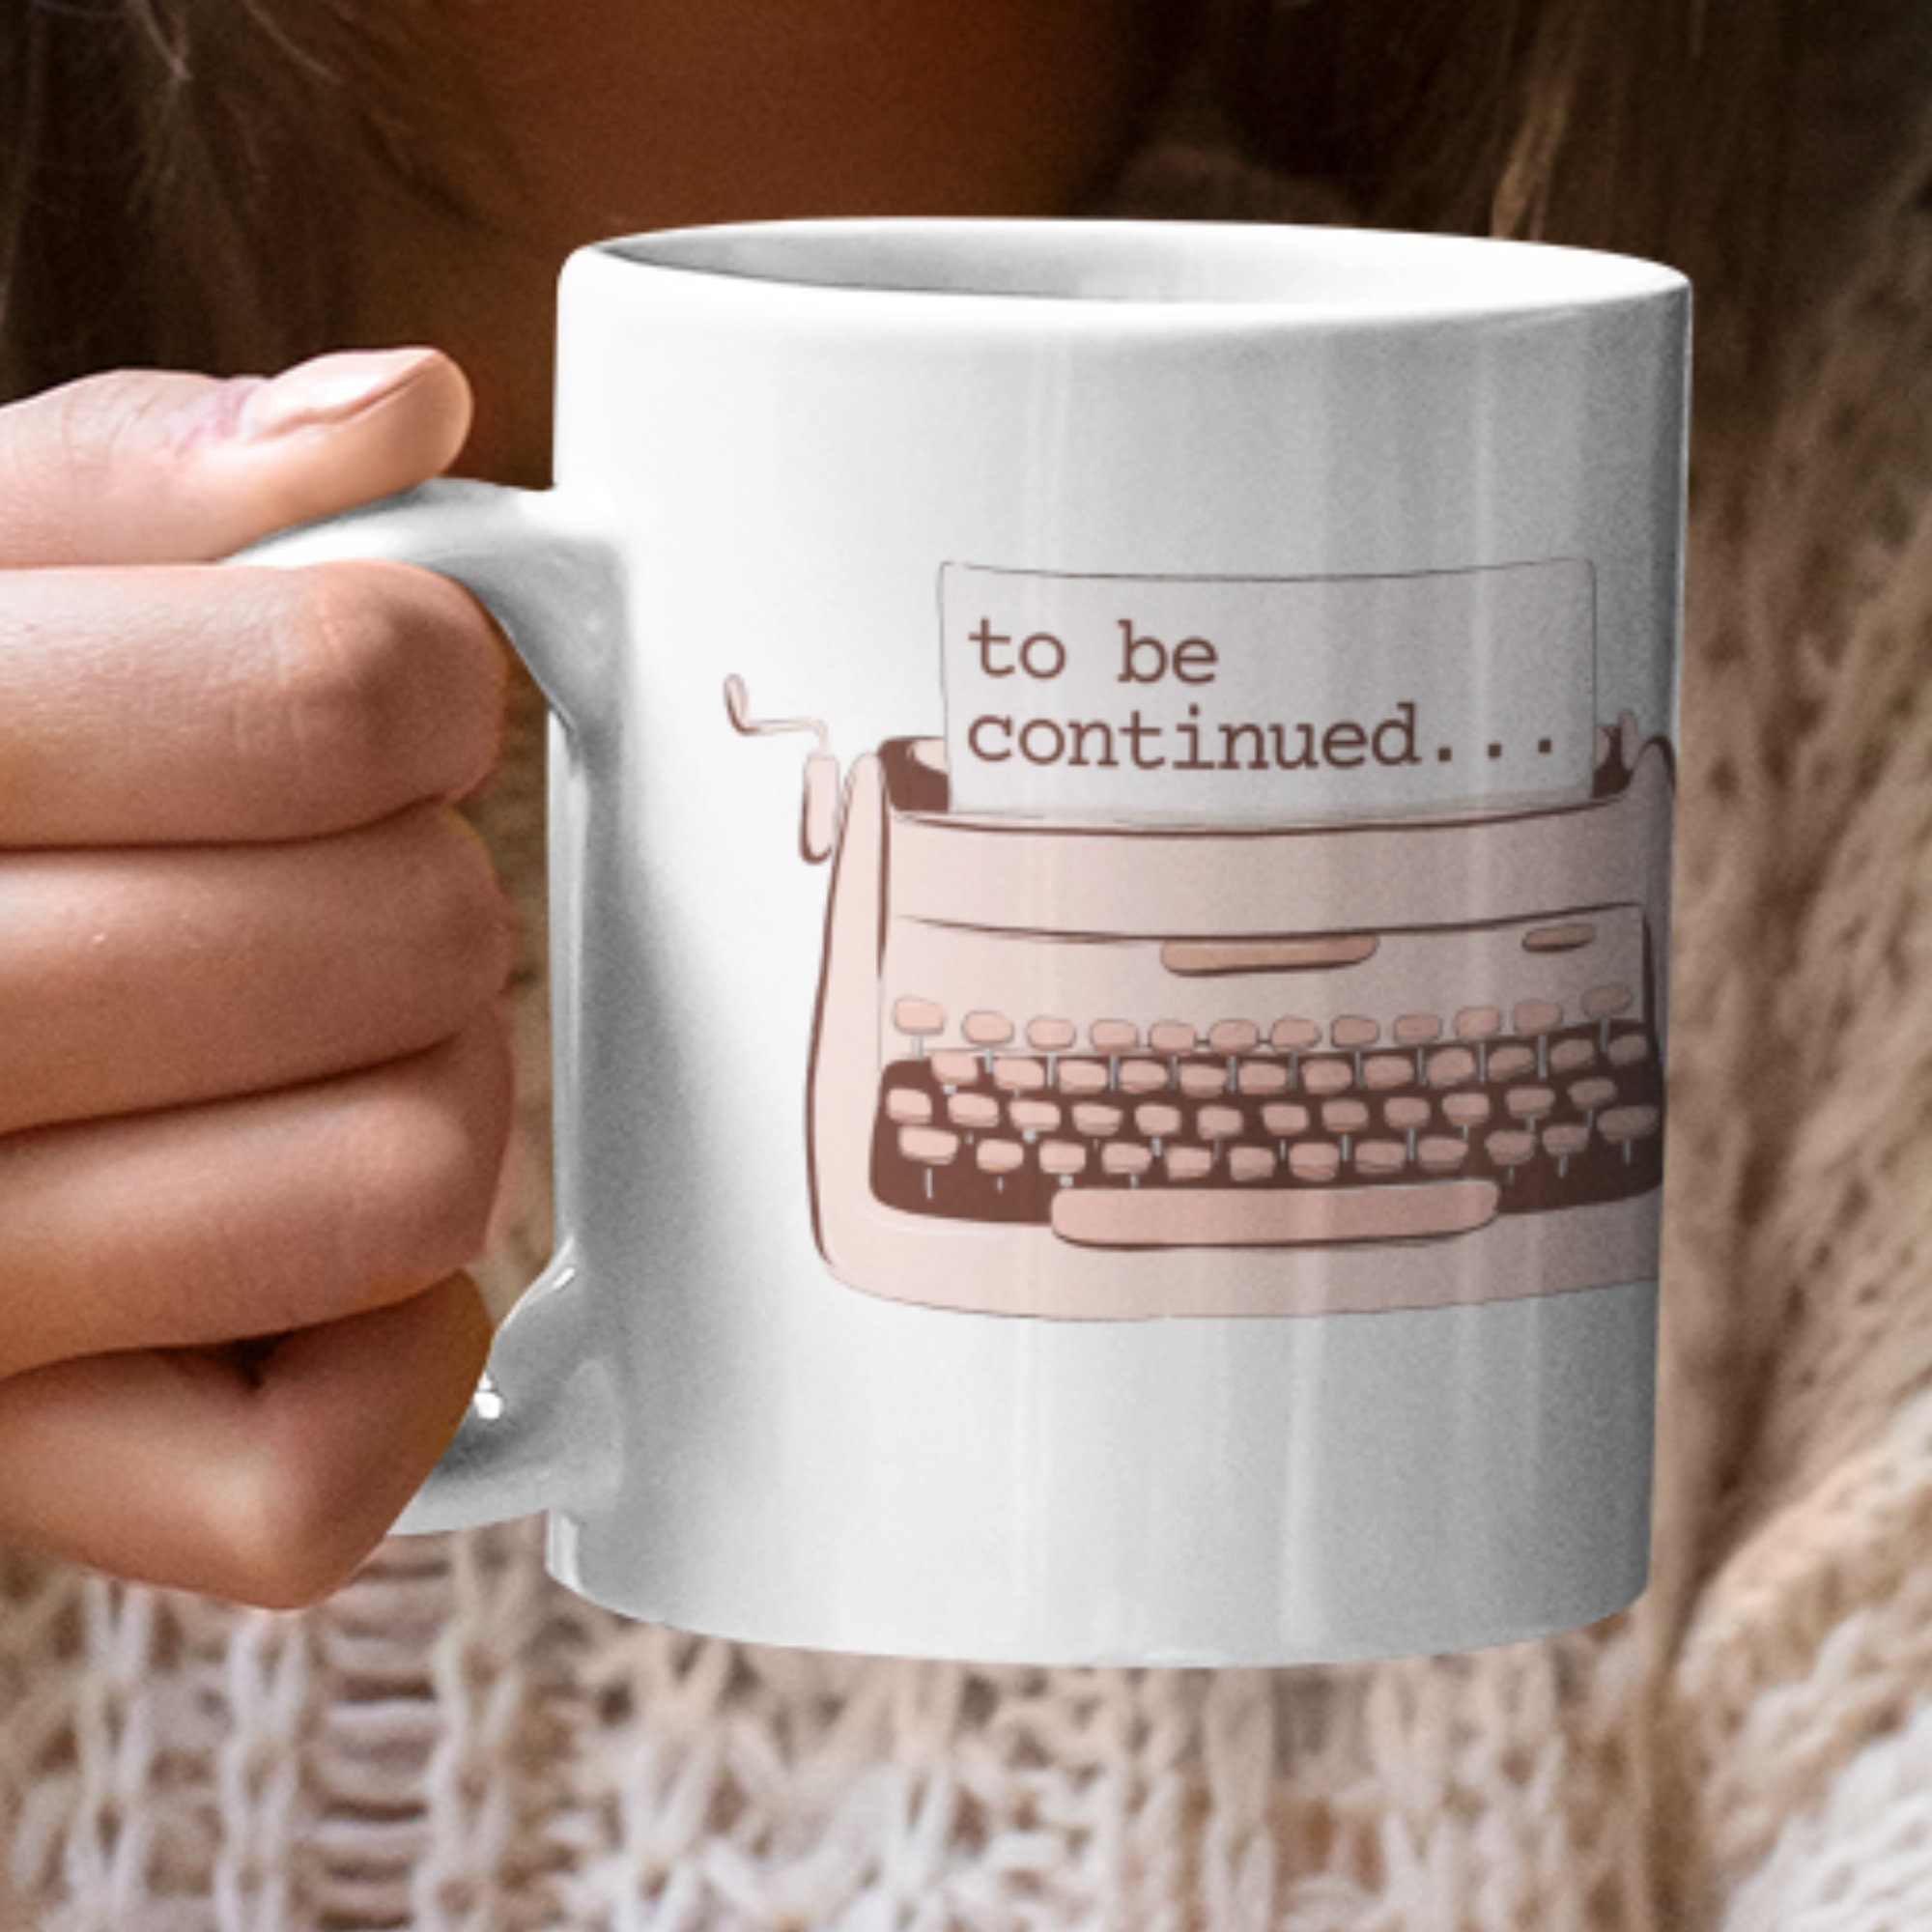 Future Bestselling Author Gift, Gift for Writer, Present for Author,  Writers Gift, Writing Lover Gift, Writing Gifts, Funny Author Gifts 